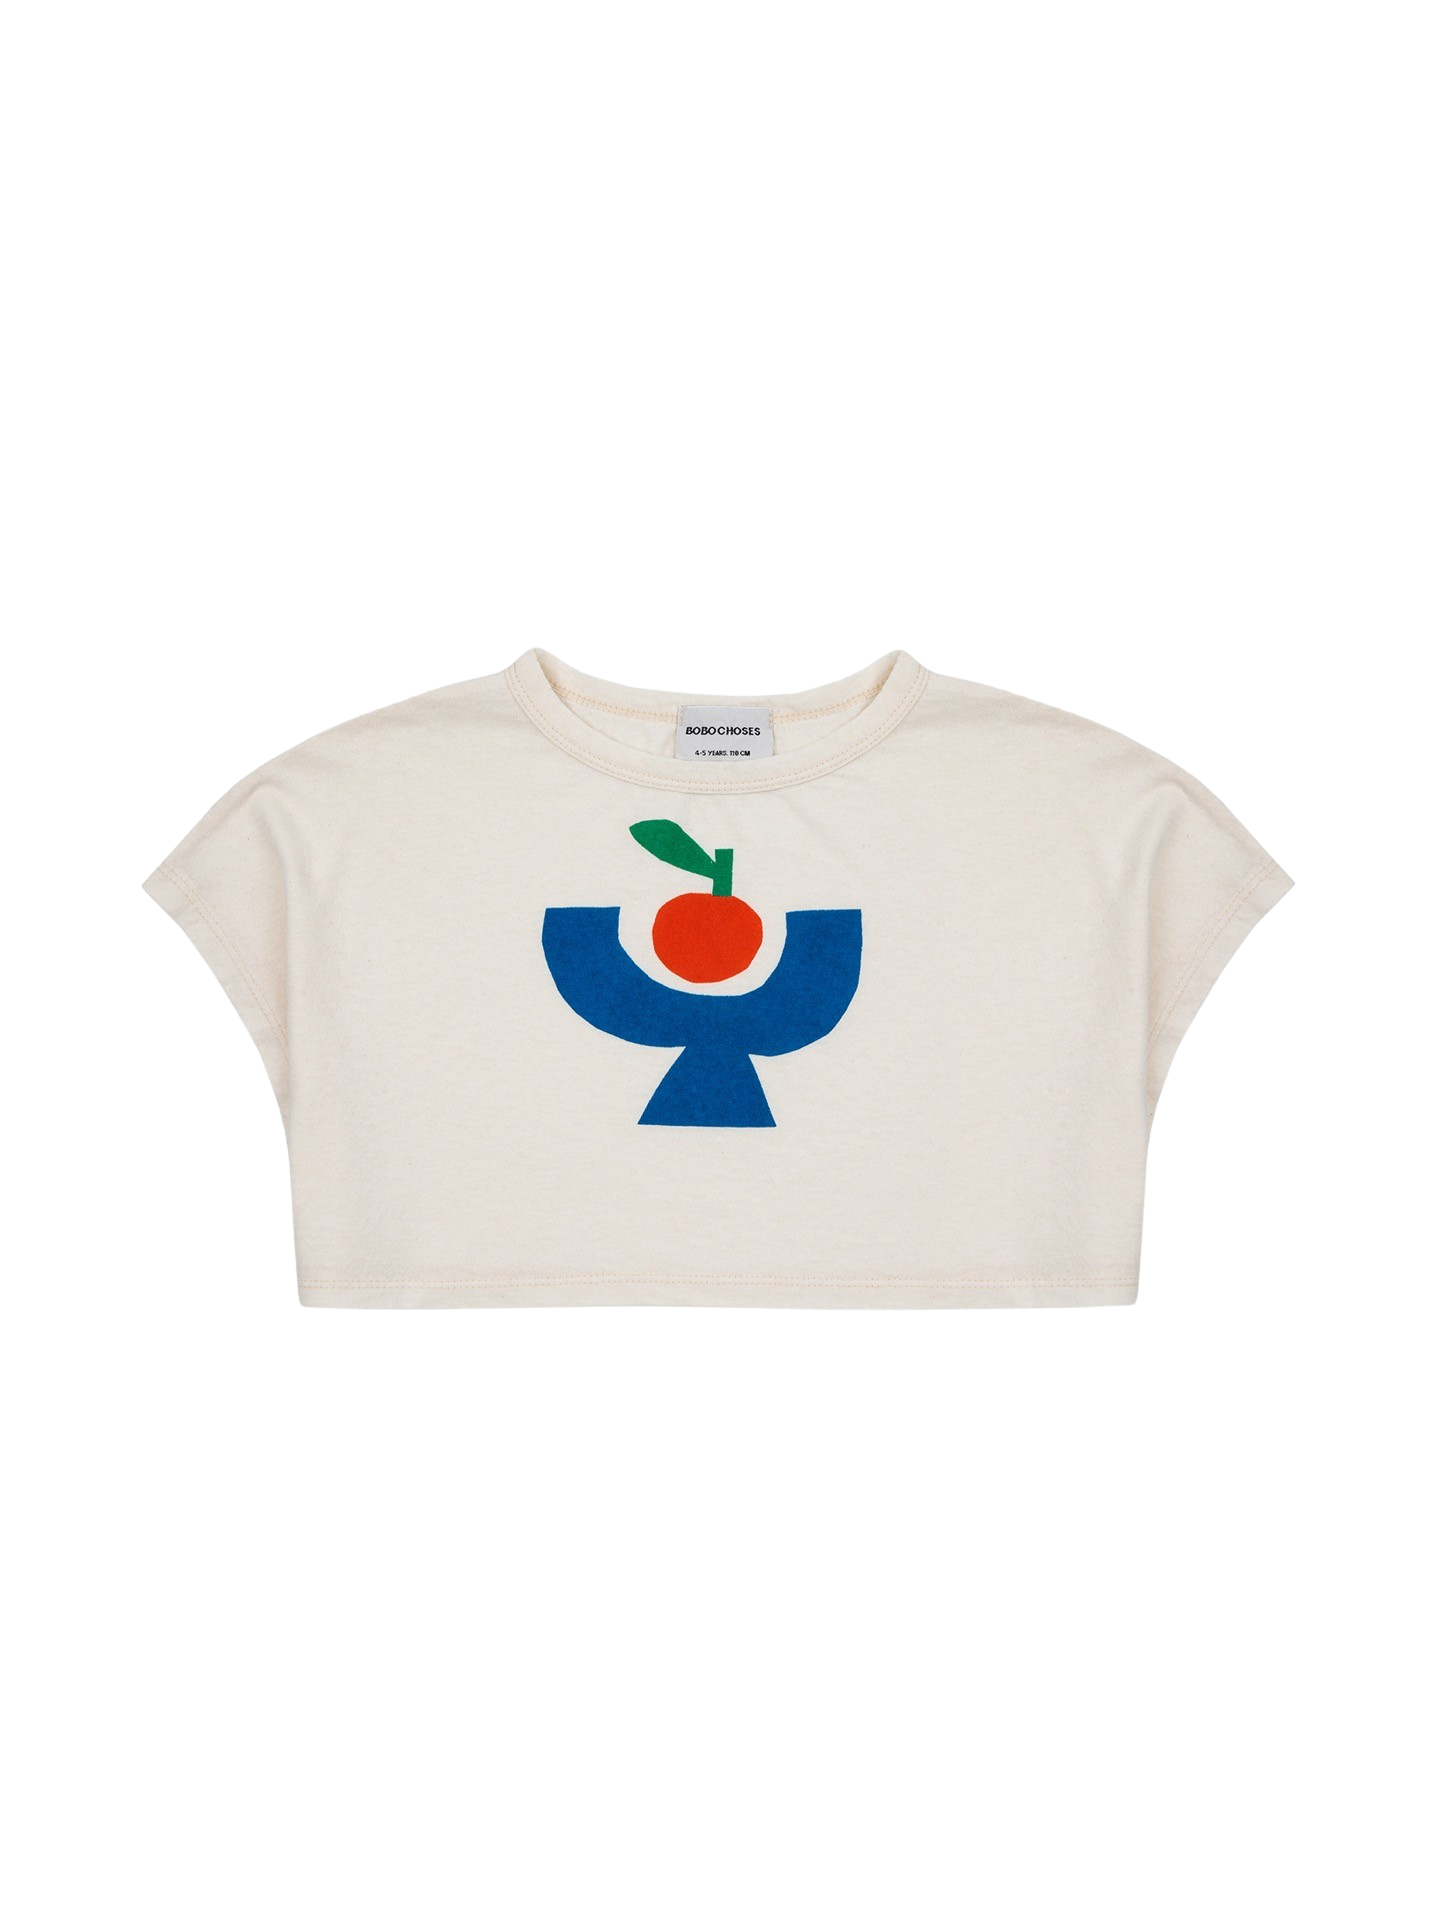 Tomato Plate cropped T-shirt